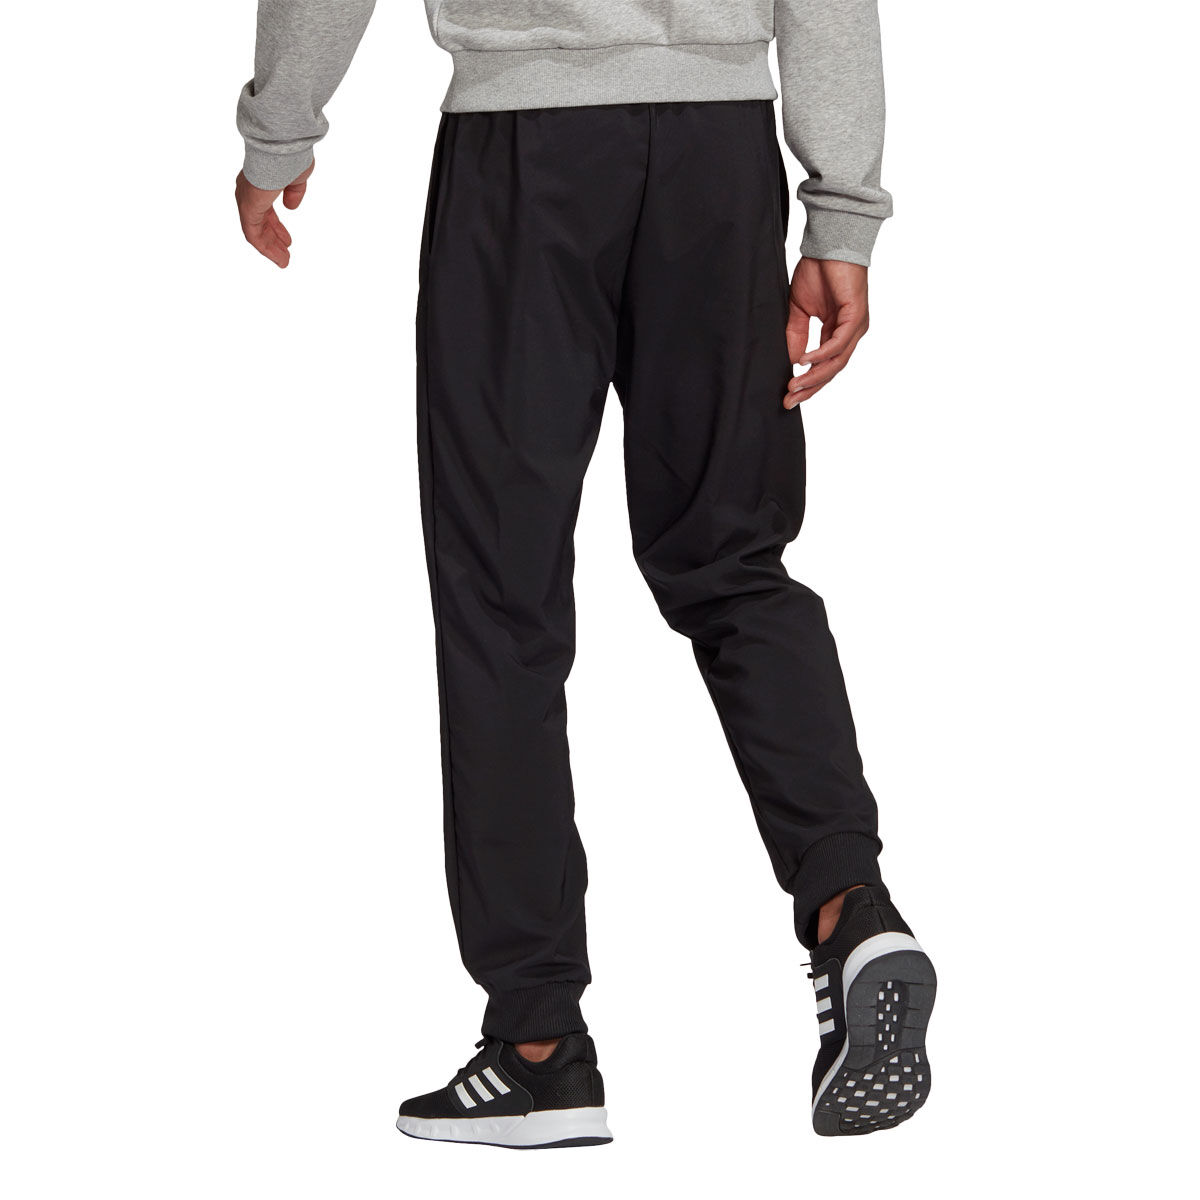 adidas Mens Aeroready Essentials Stanford Tapered Cuff Embroidered Small  Logo Pants  Amazonin Clothing  Accessories